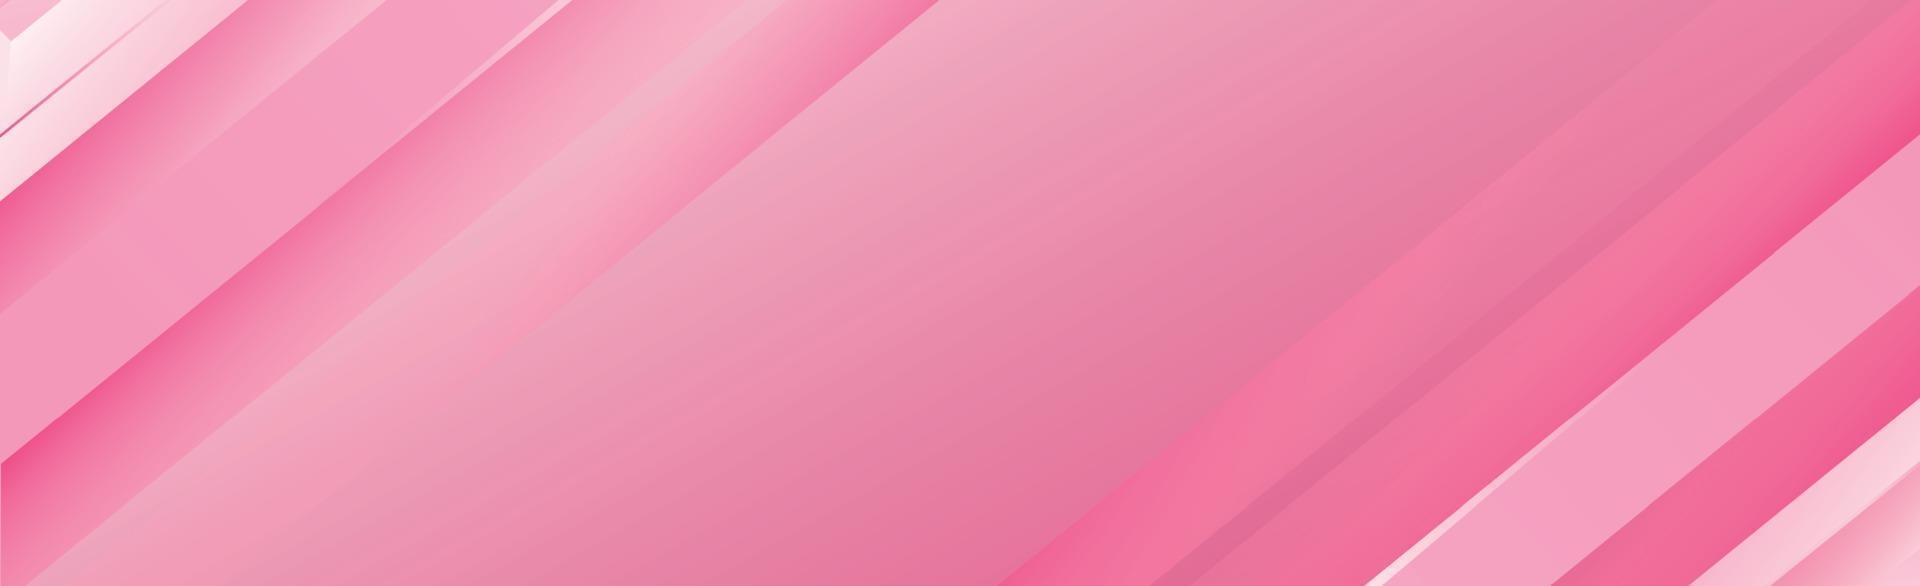 Abstract pink line background with glow and shadow - Vector